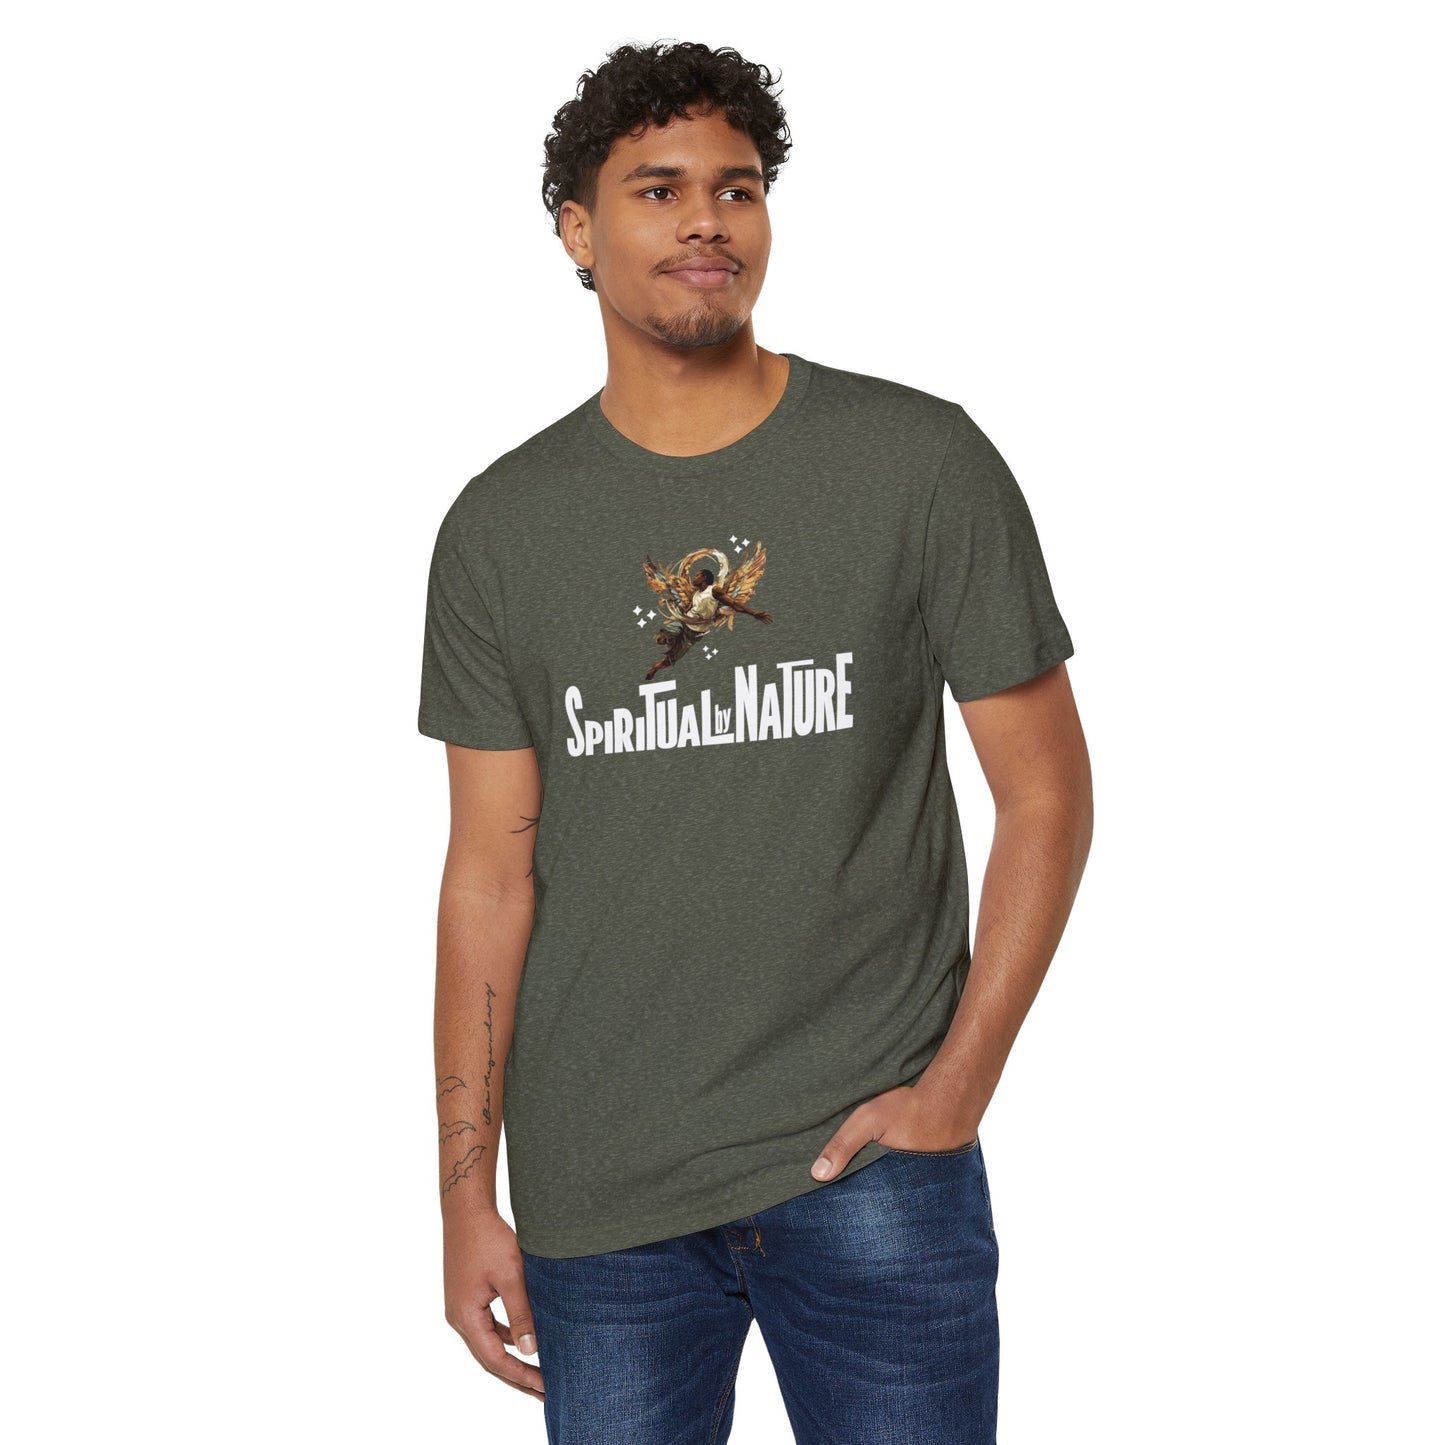 Spiritual by Nature Collection, Unisex Recycled Organic T-Shirt, Eco-Spiritual Organic Tee, Comfort and Style